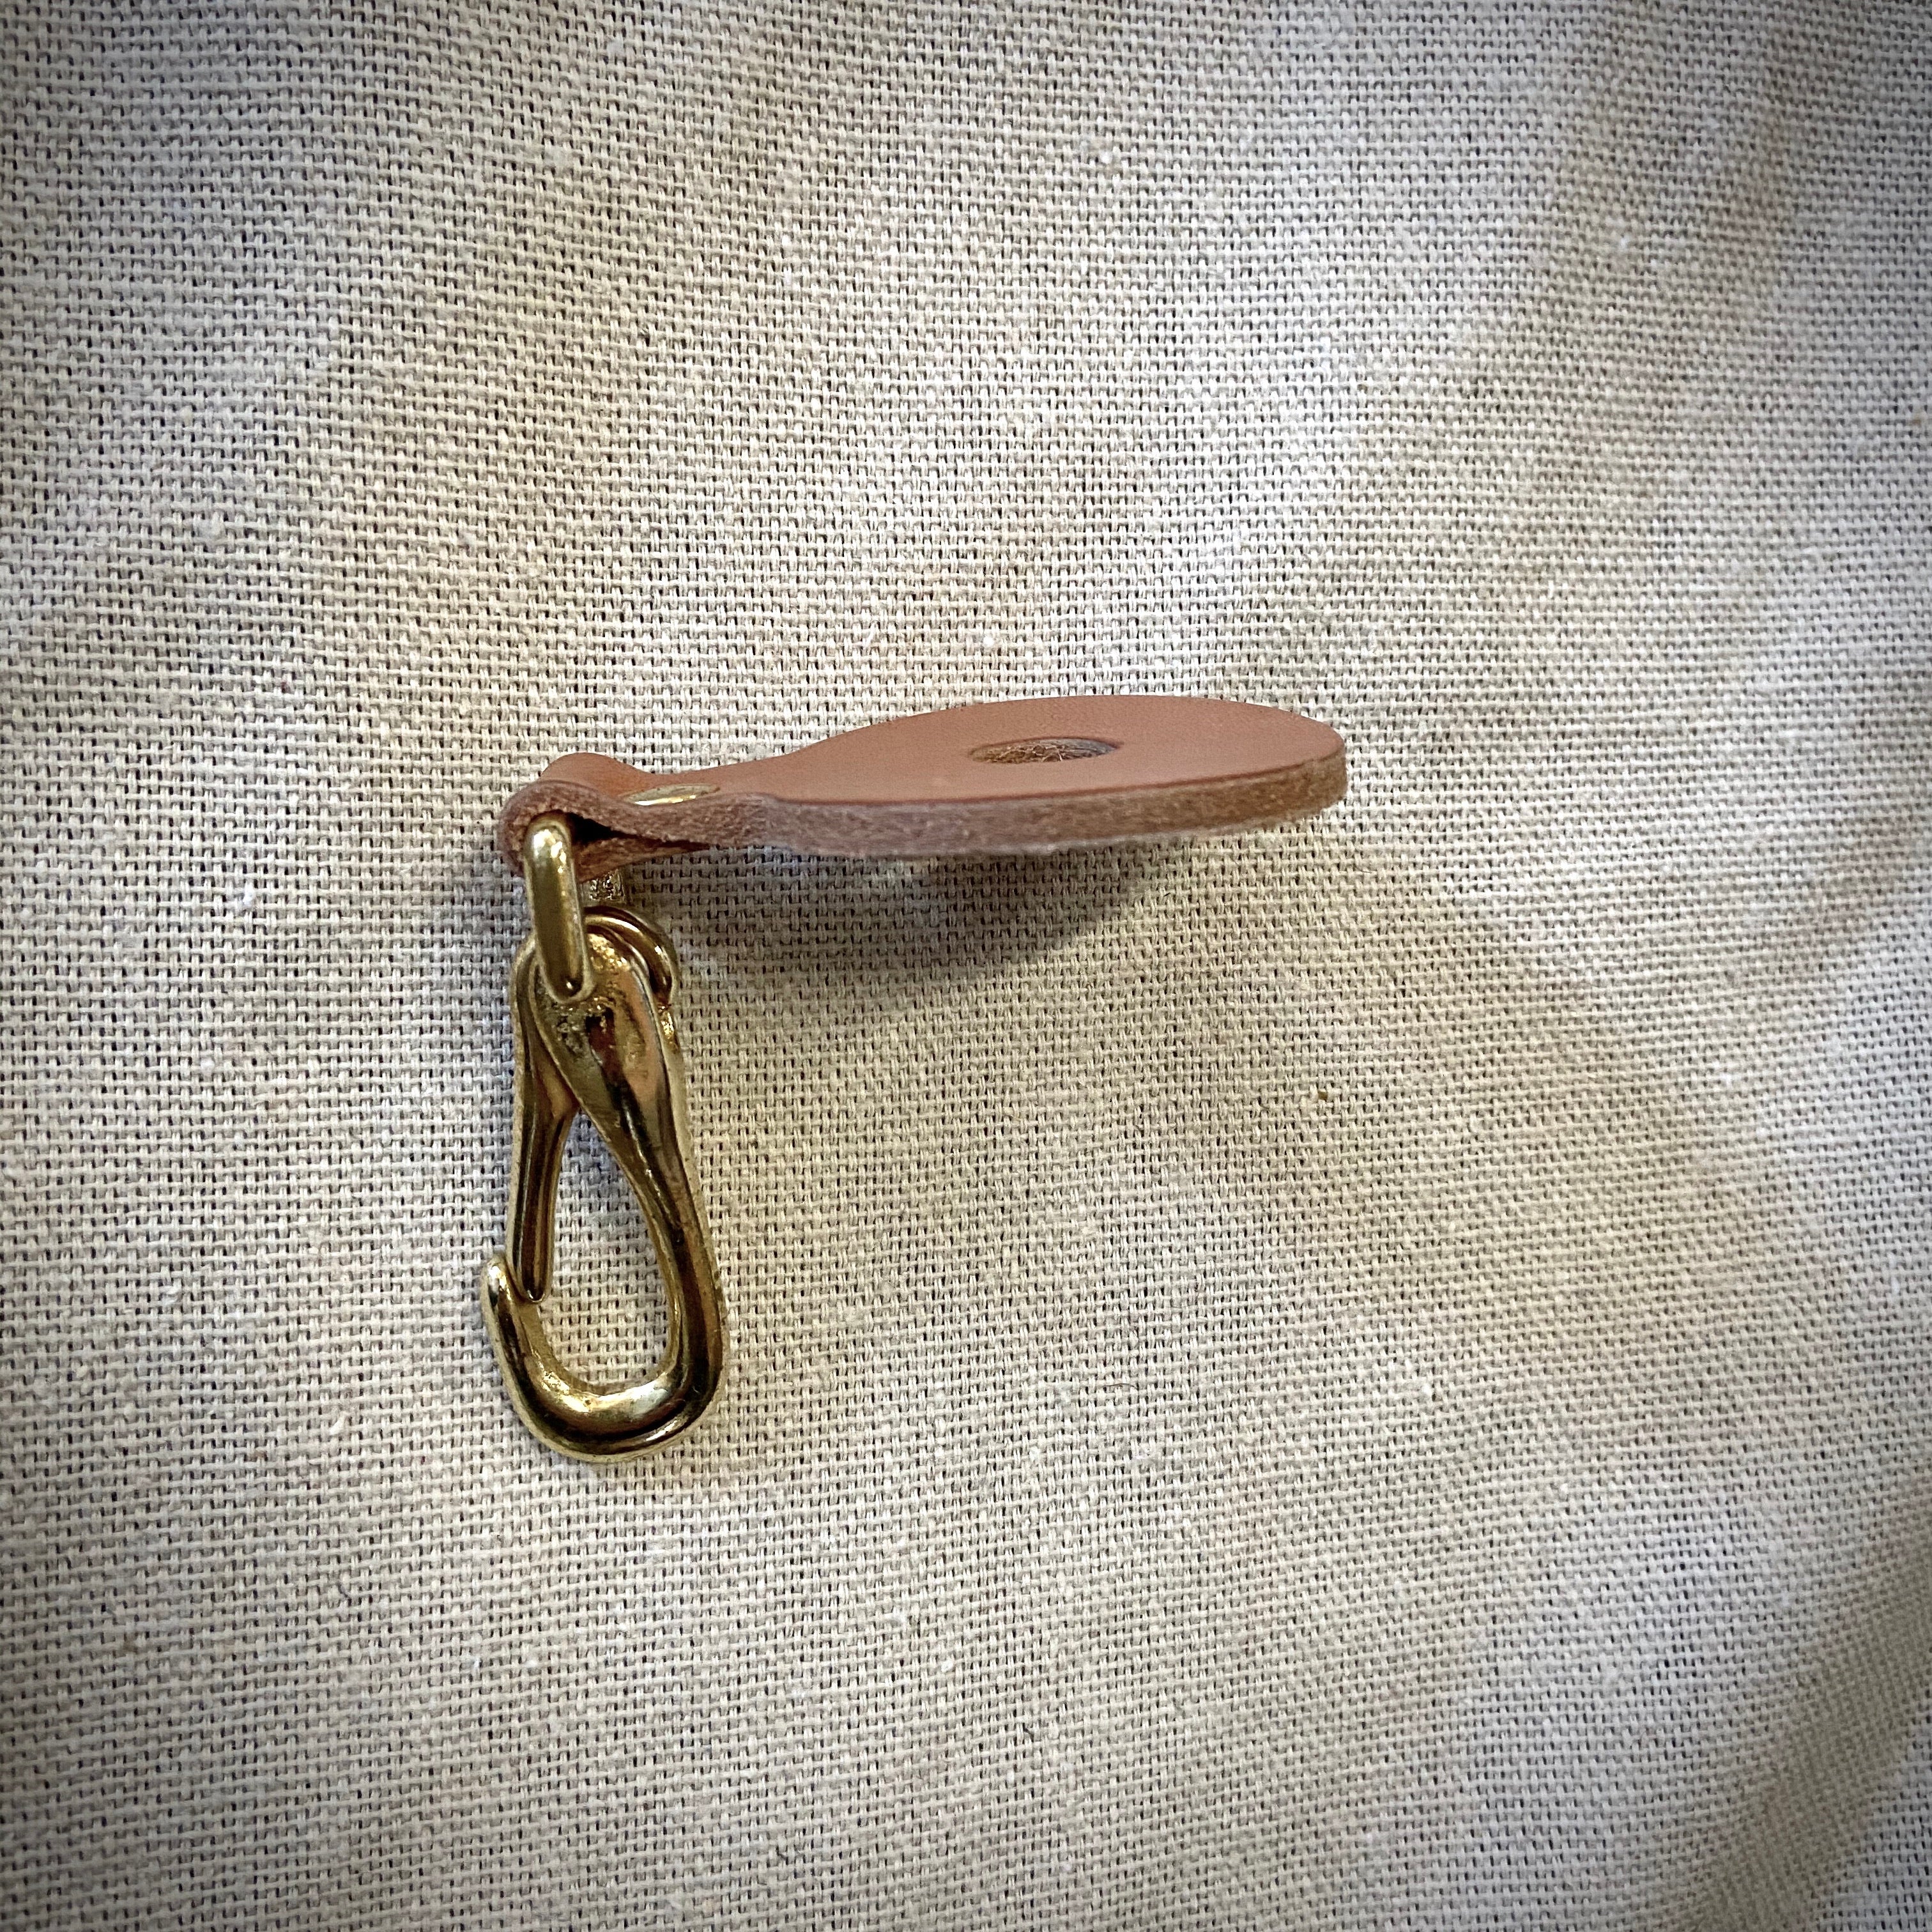 The Hat Hook – TACKLE Instrument Supply Co.